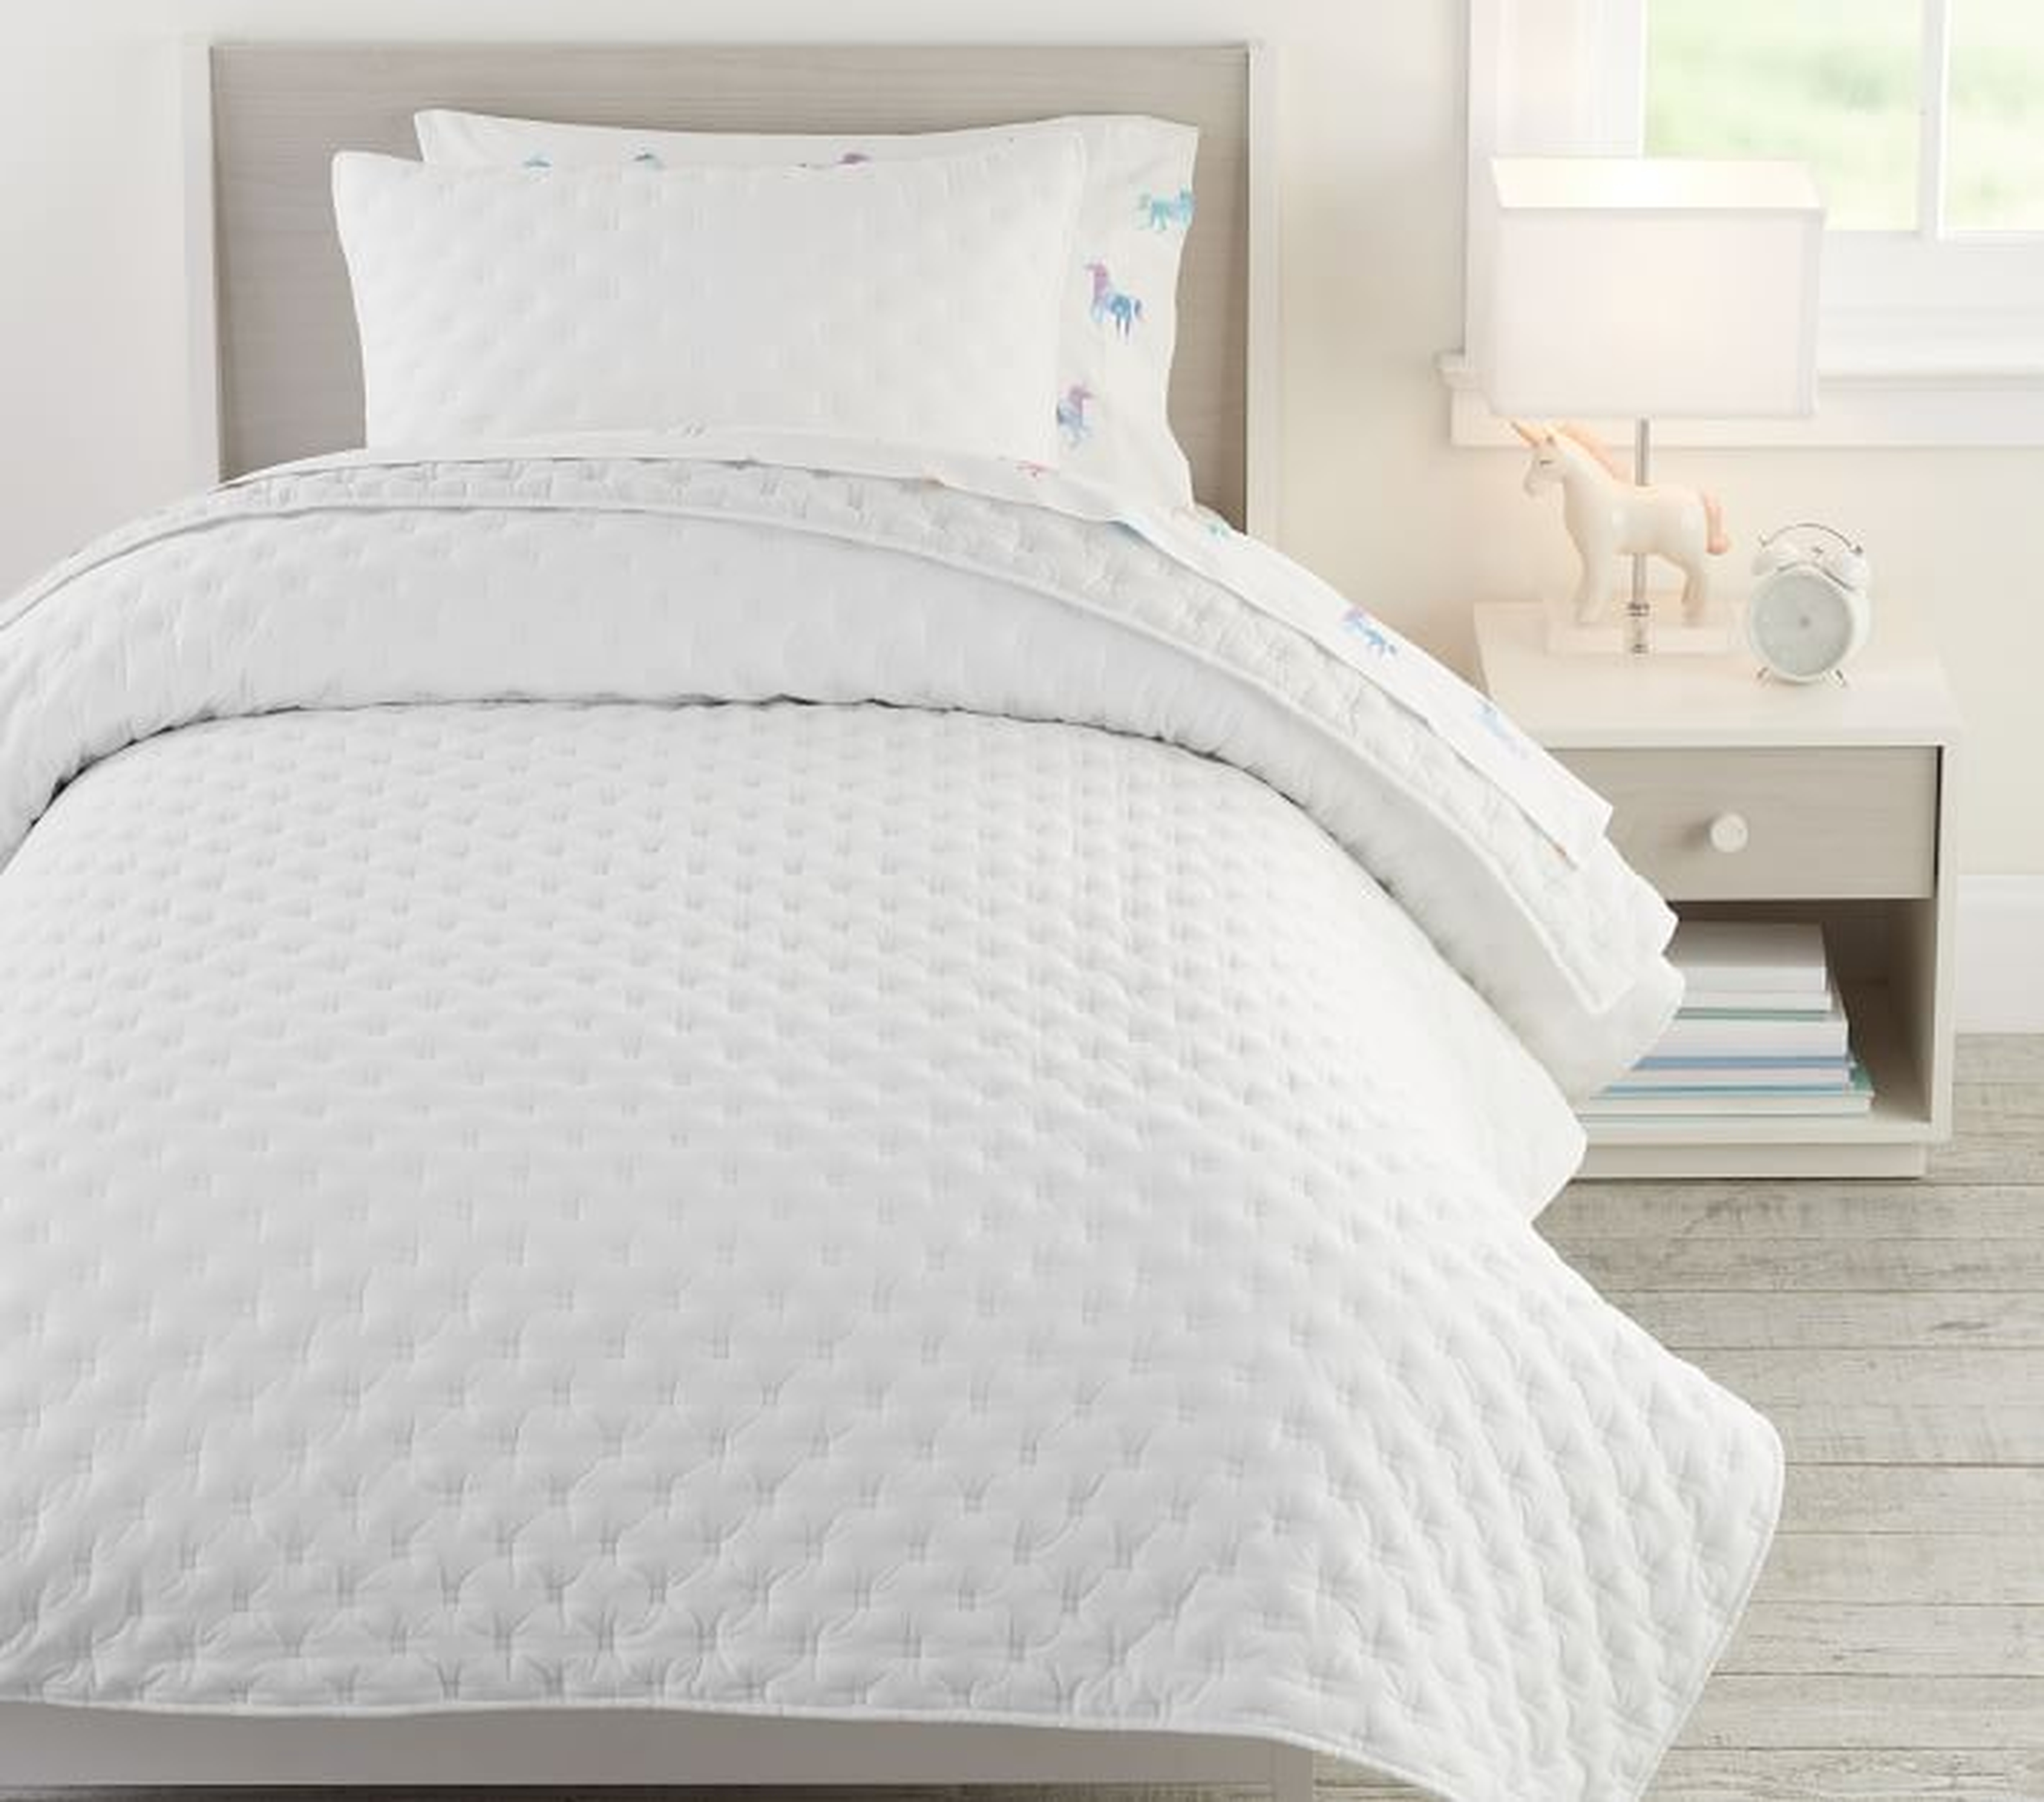 Square Stitch Quilt, Twin, White - Pottery Barn Teen